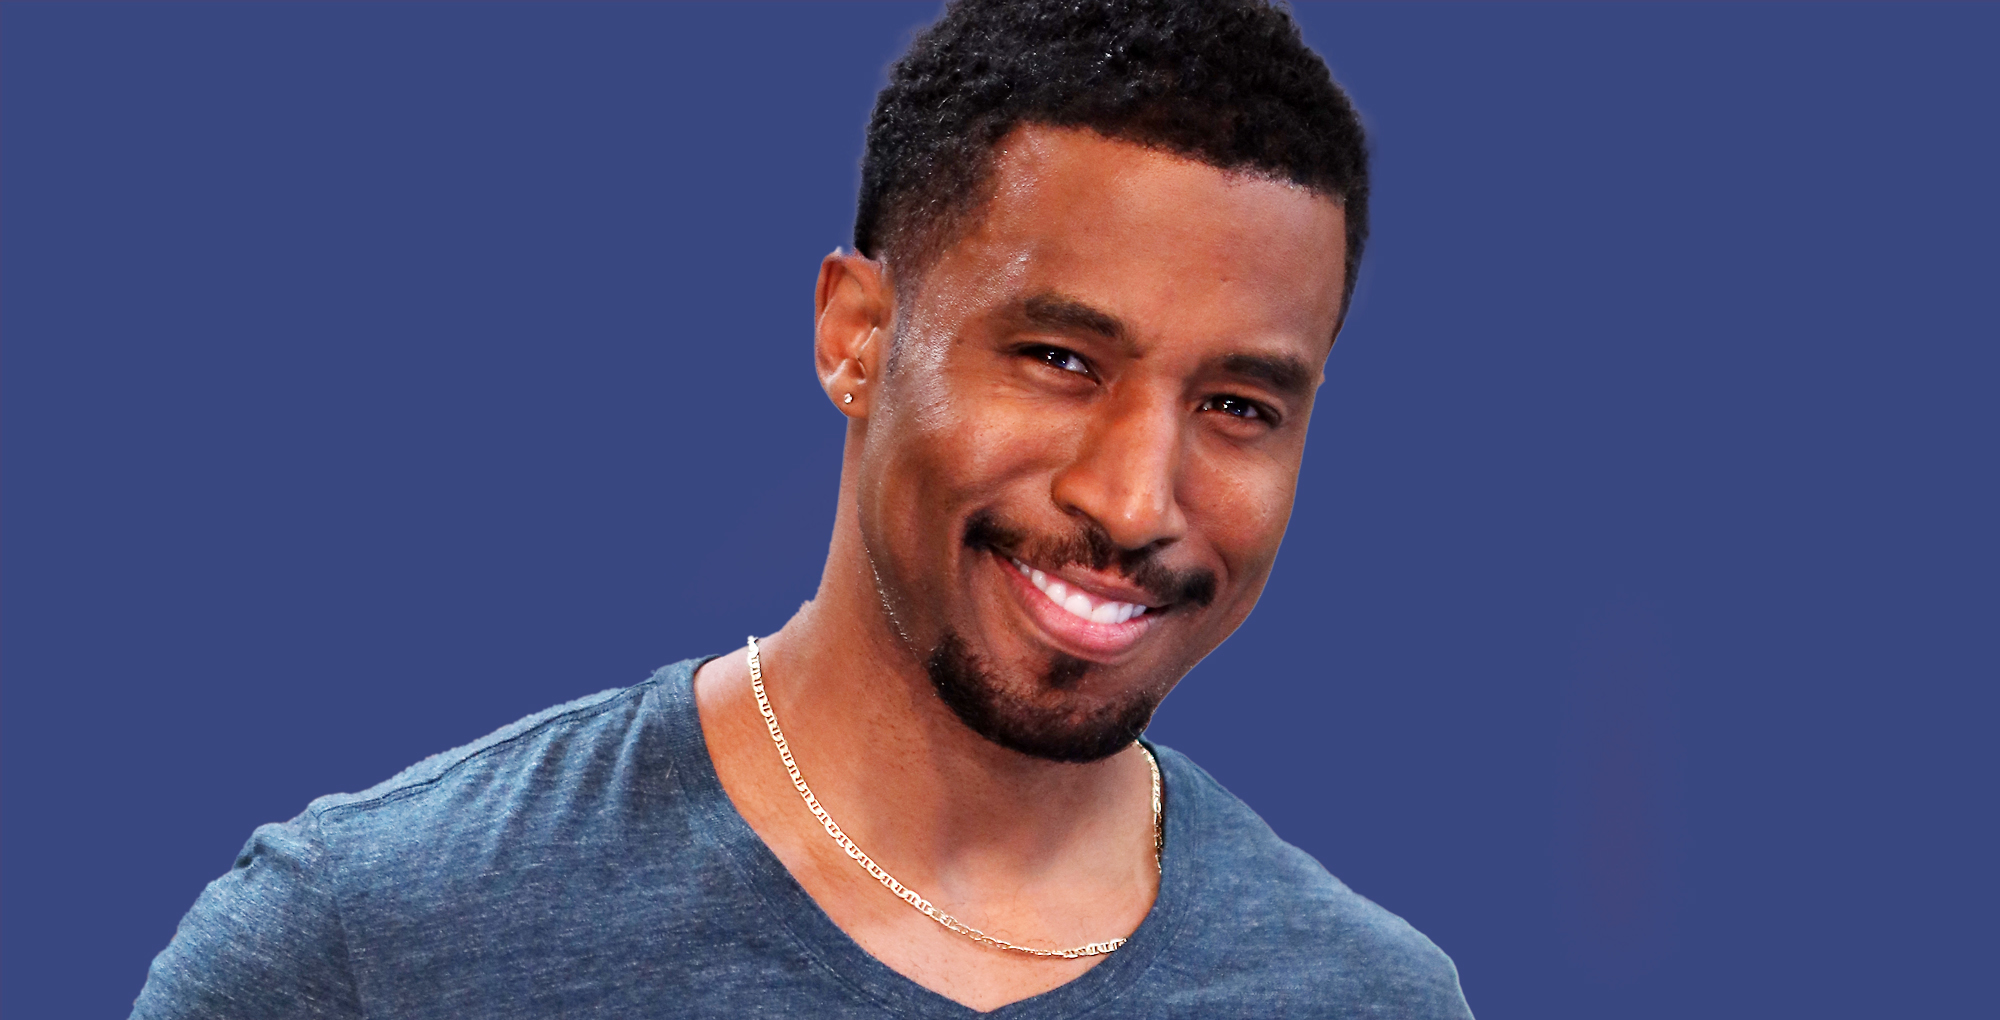 gavin houston who plays zeke on general hospital against a blue background.